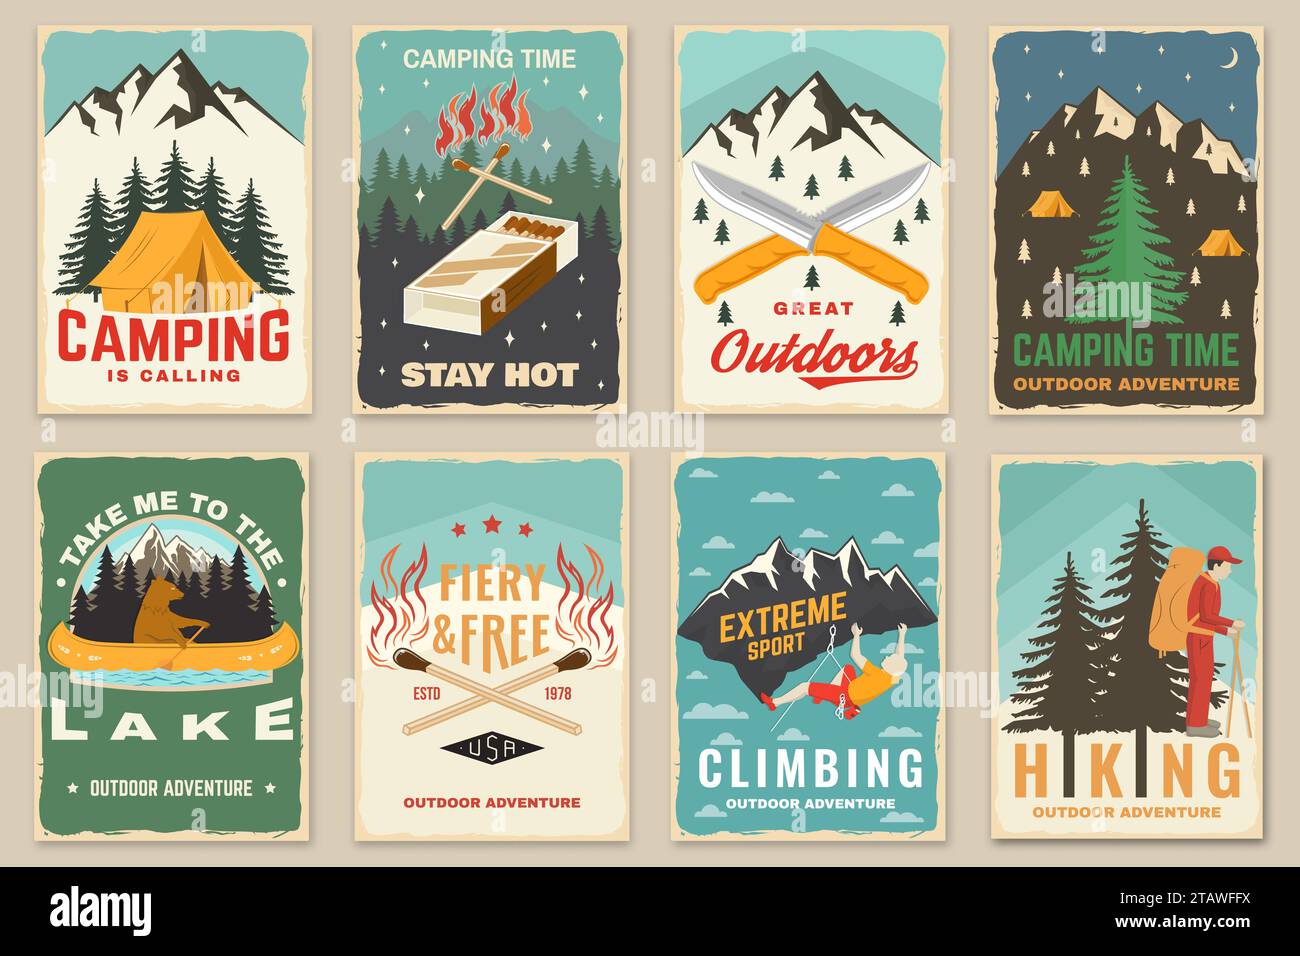 Set of camping retro posters. Outdoor adventure vector badge design. Vintage typography design with knives, bear in canoe, matches stick, burning Stock Vector